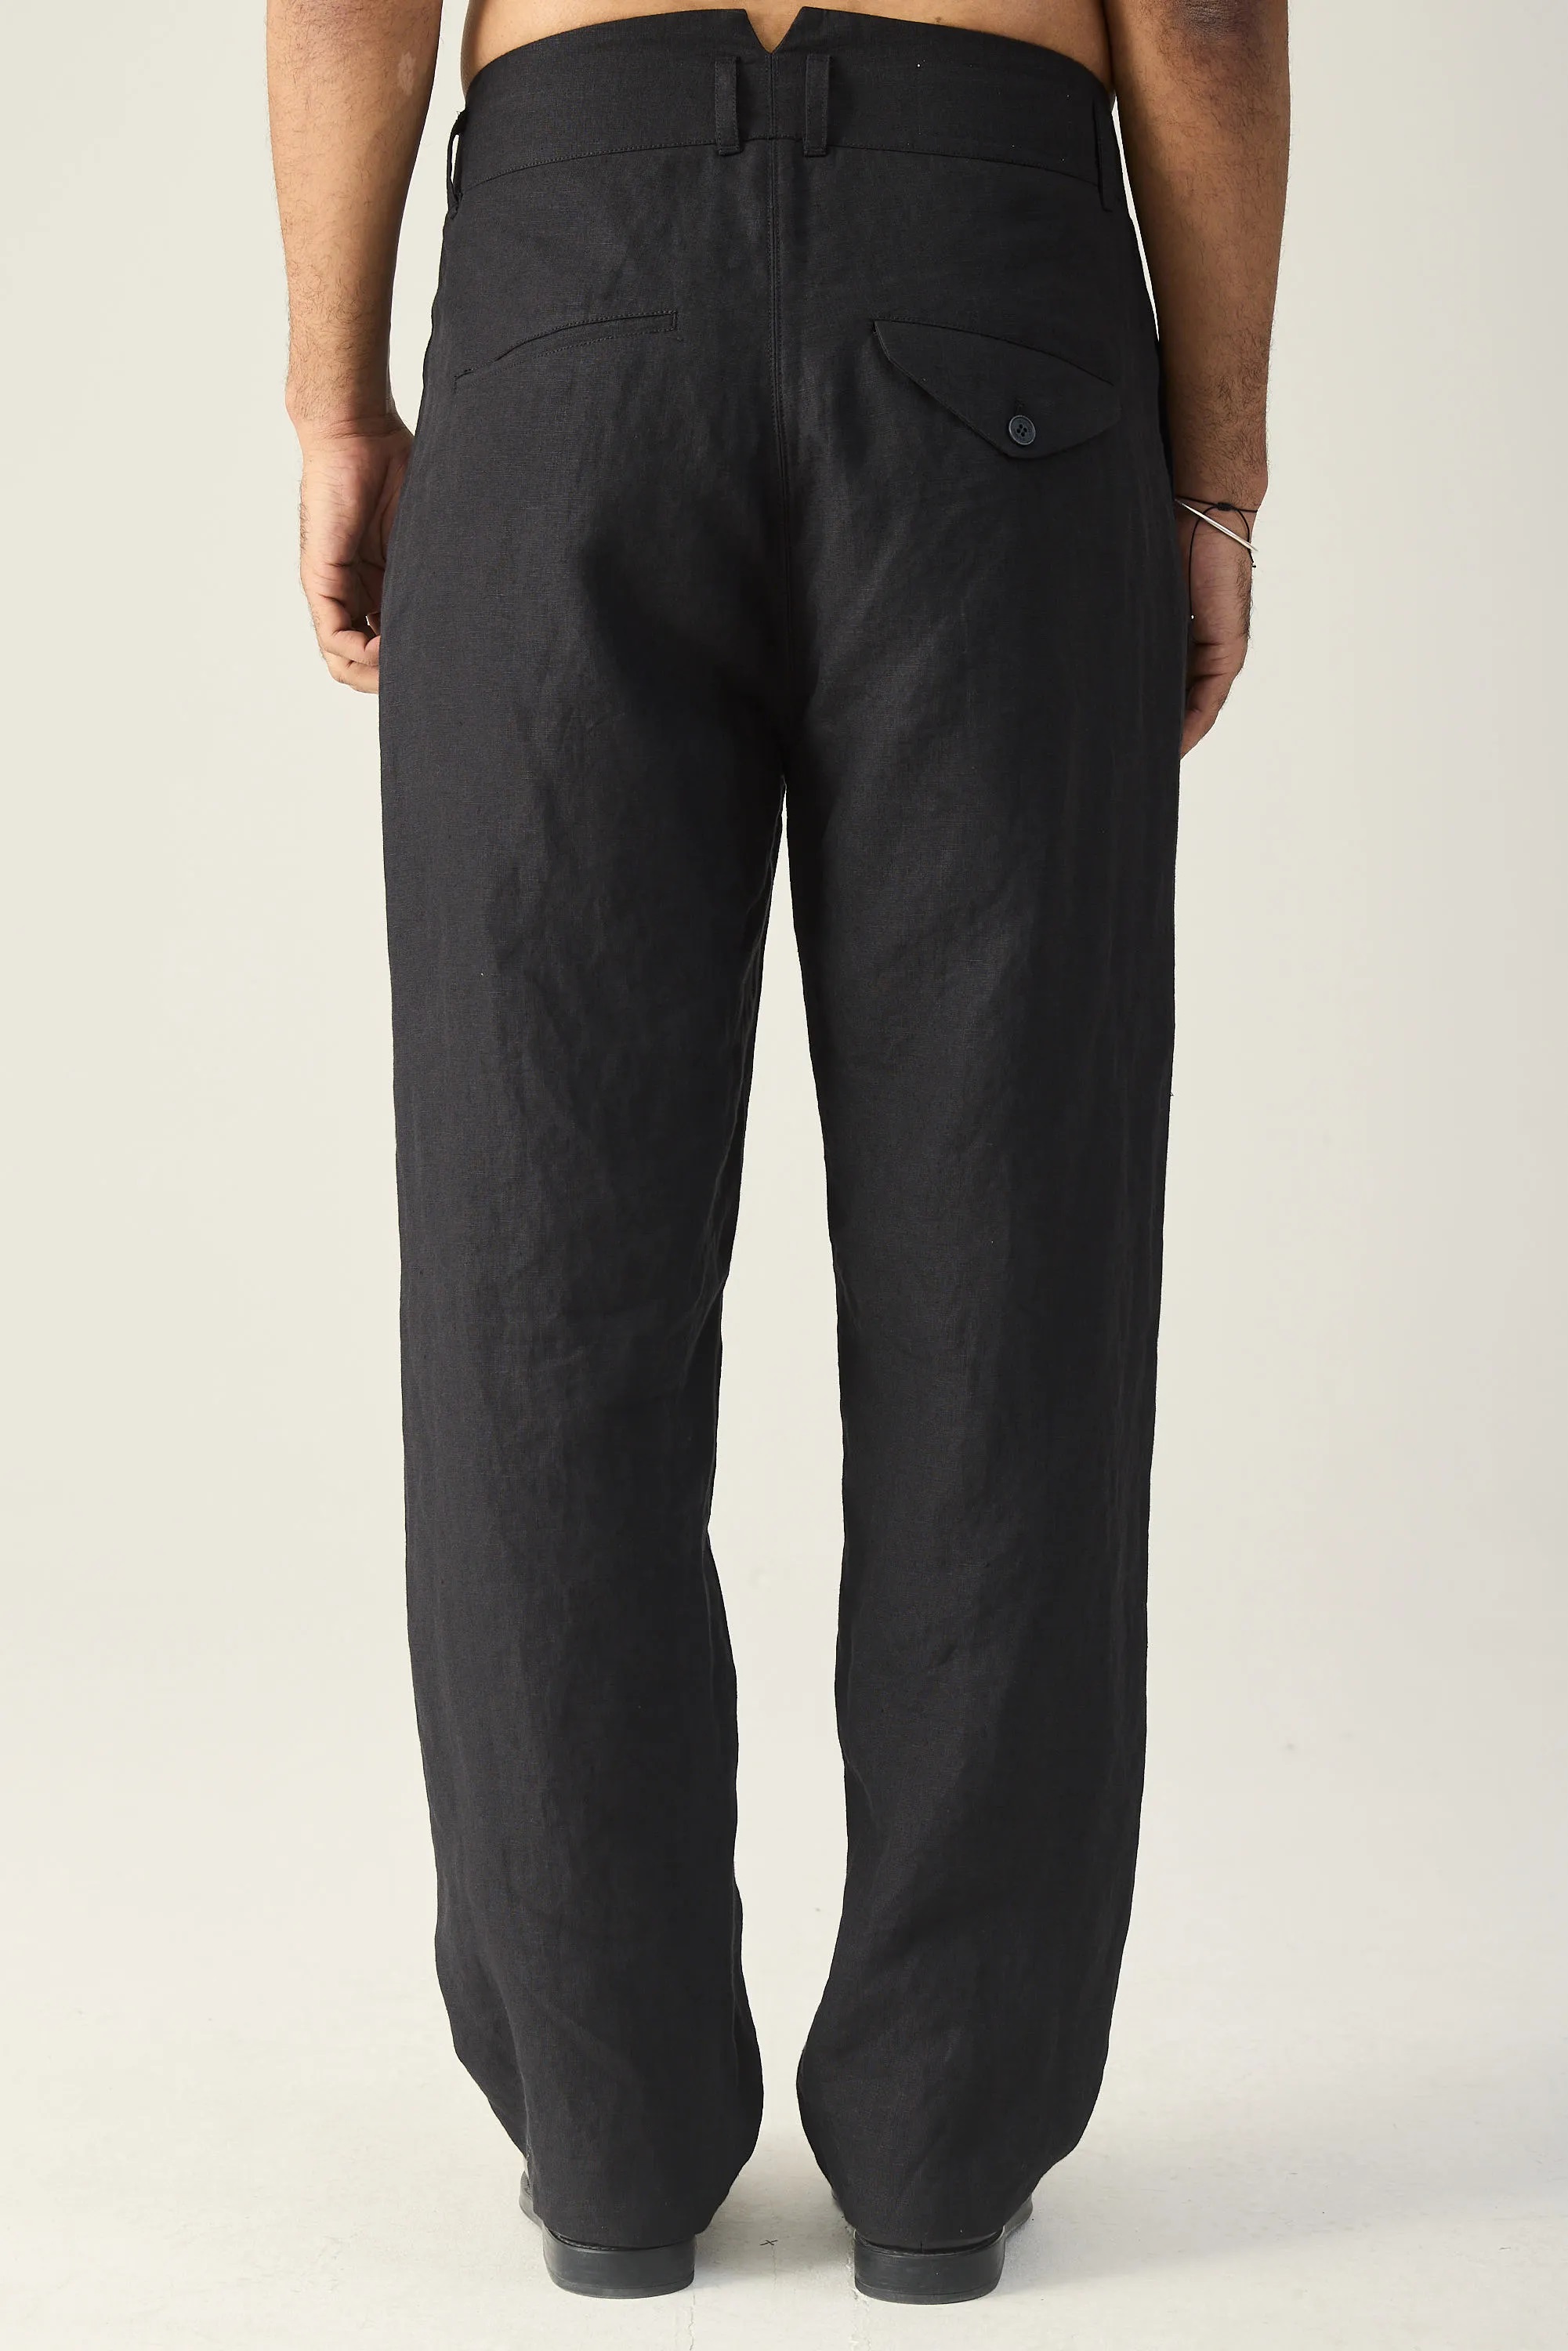 HANNIBAL. Trouser Heli in Washed Black 52